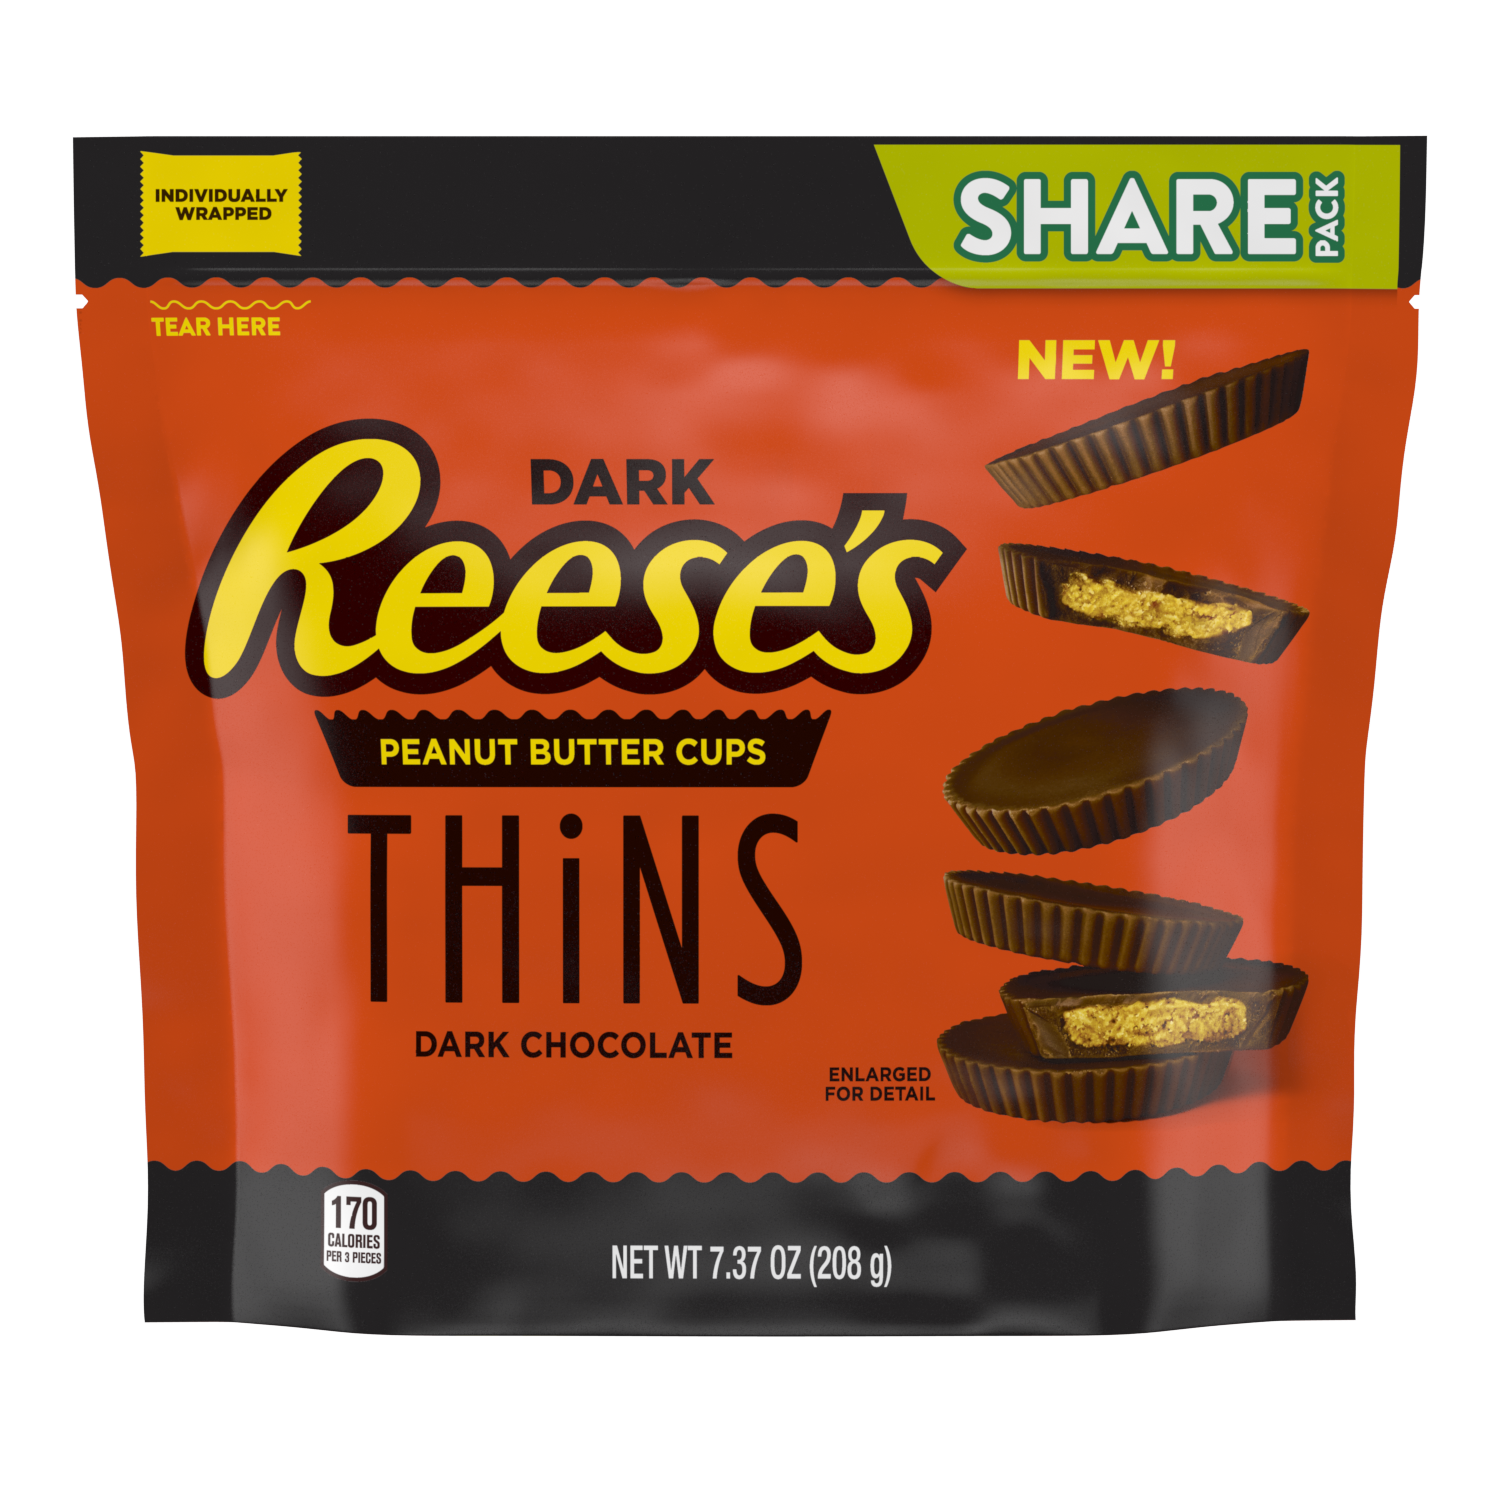 Share Pack    Reese's Peanut Butter Cups Thins Dark